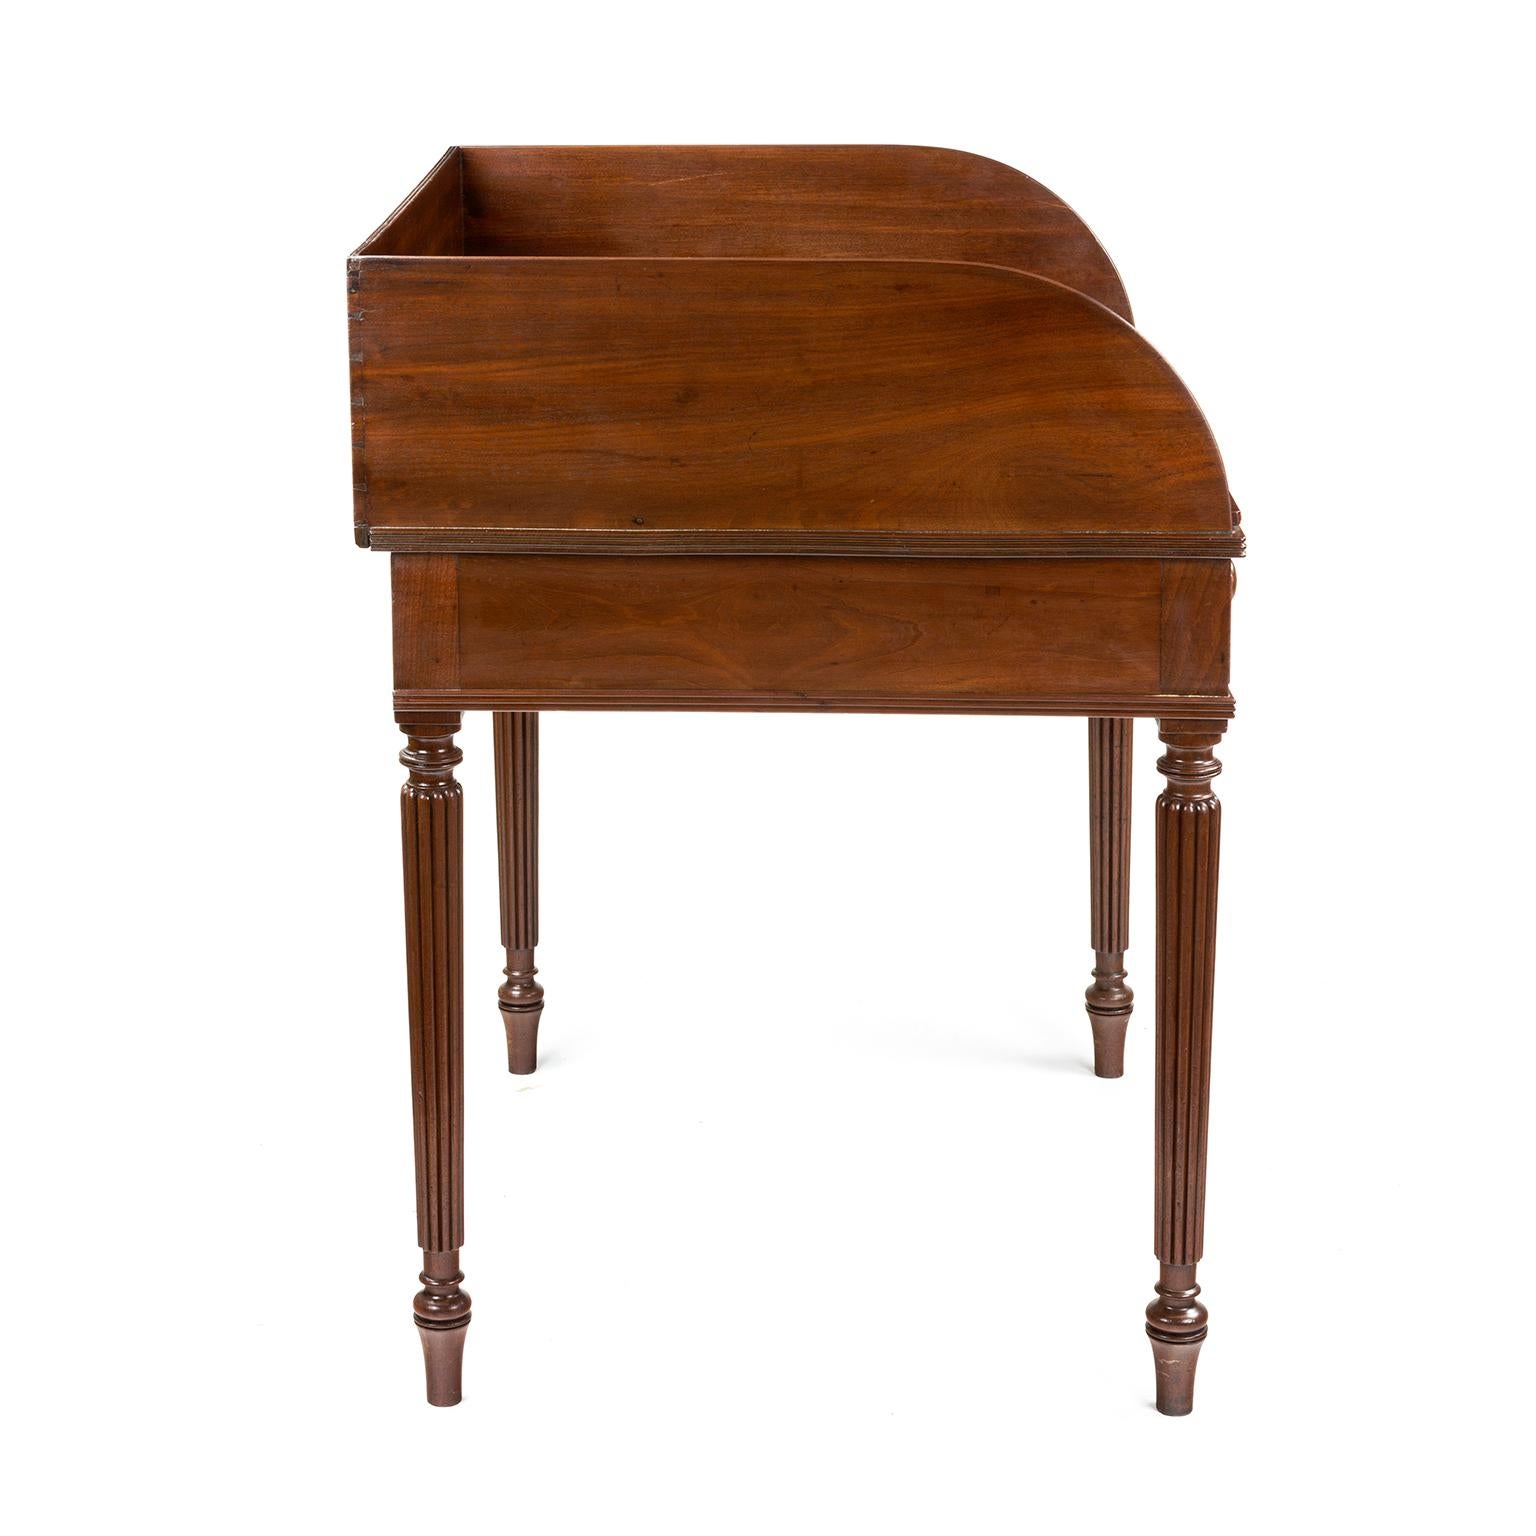 19th Century Regency Gillows wash stand / writing table in Mahogany